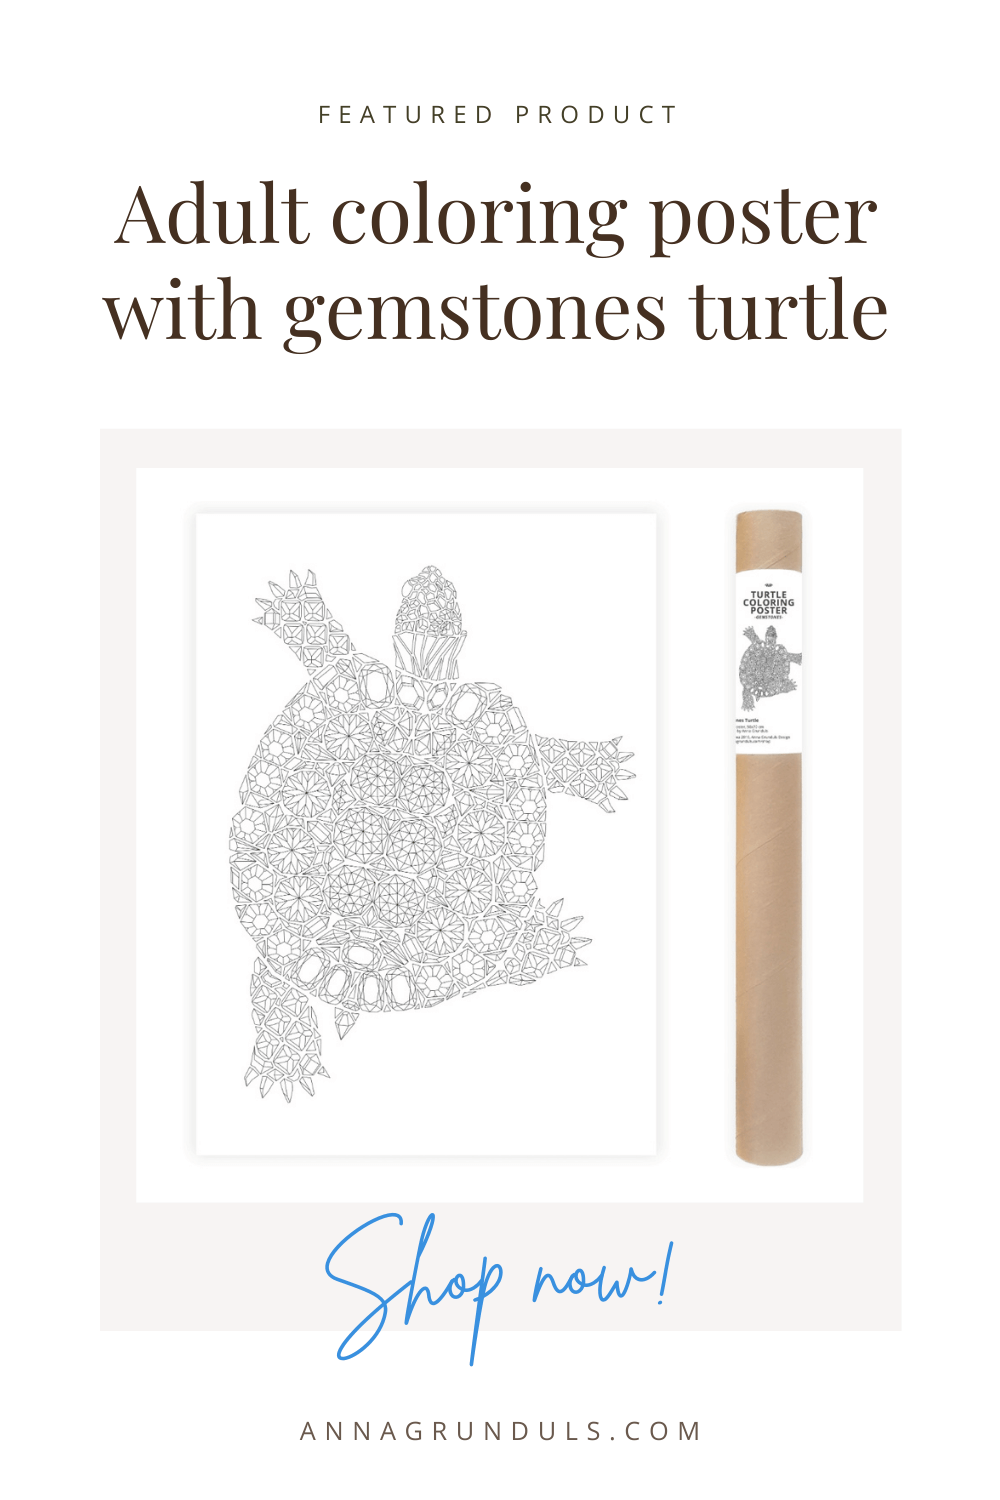 gemstones turtle poster for adult coloring pinterest pin